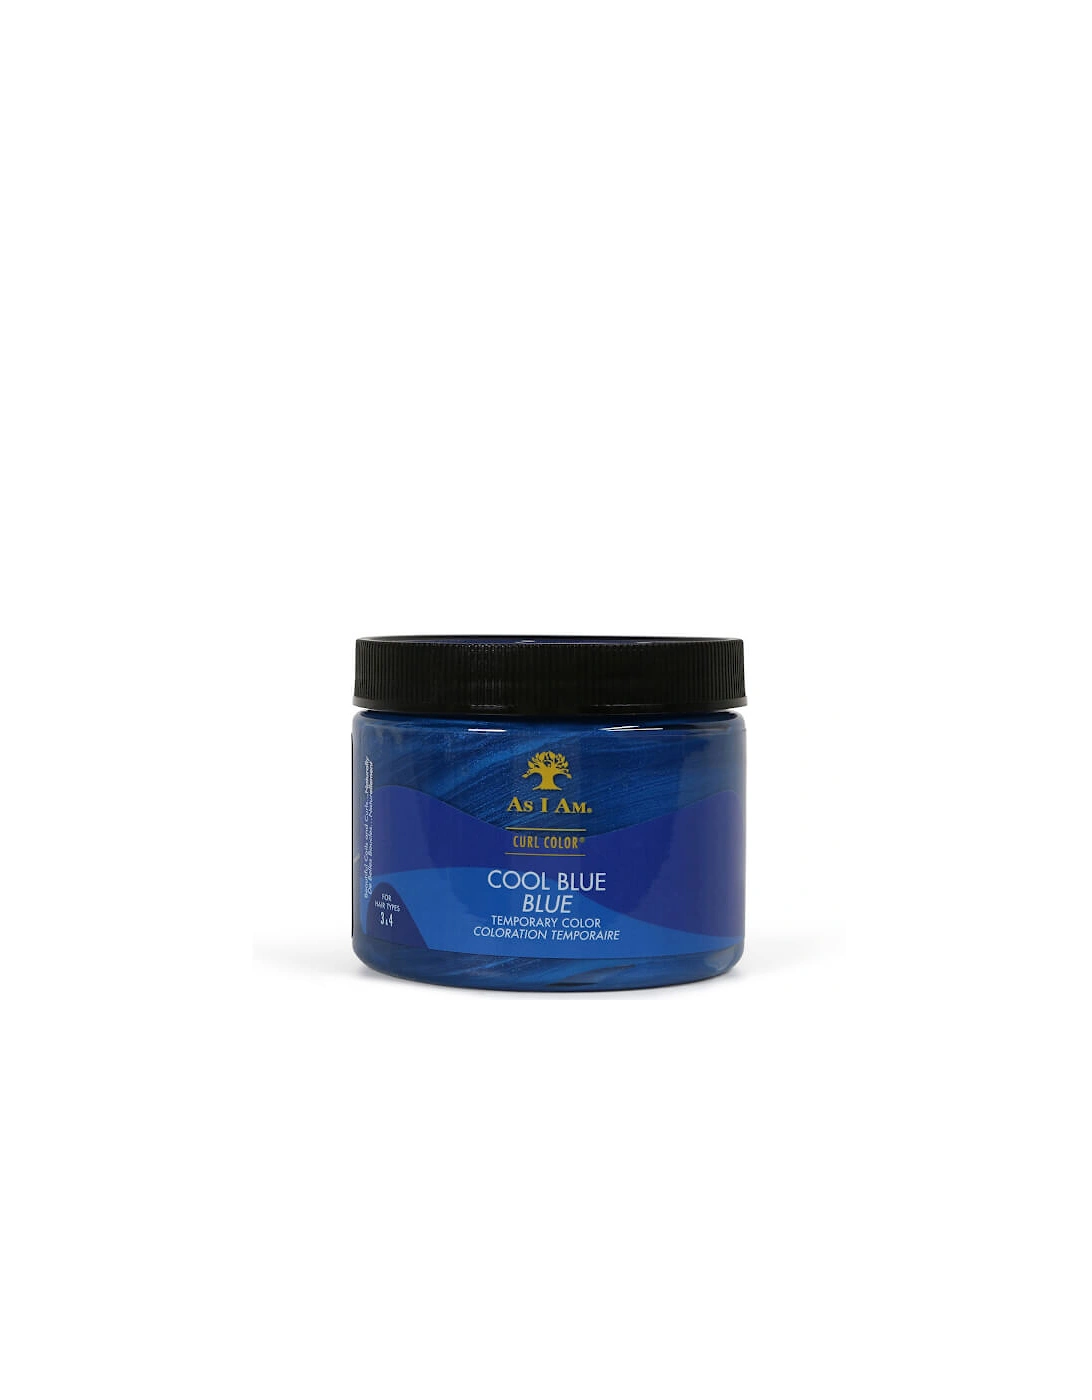 Curl Color Cool Blue 182g, 2 of 1